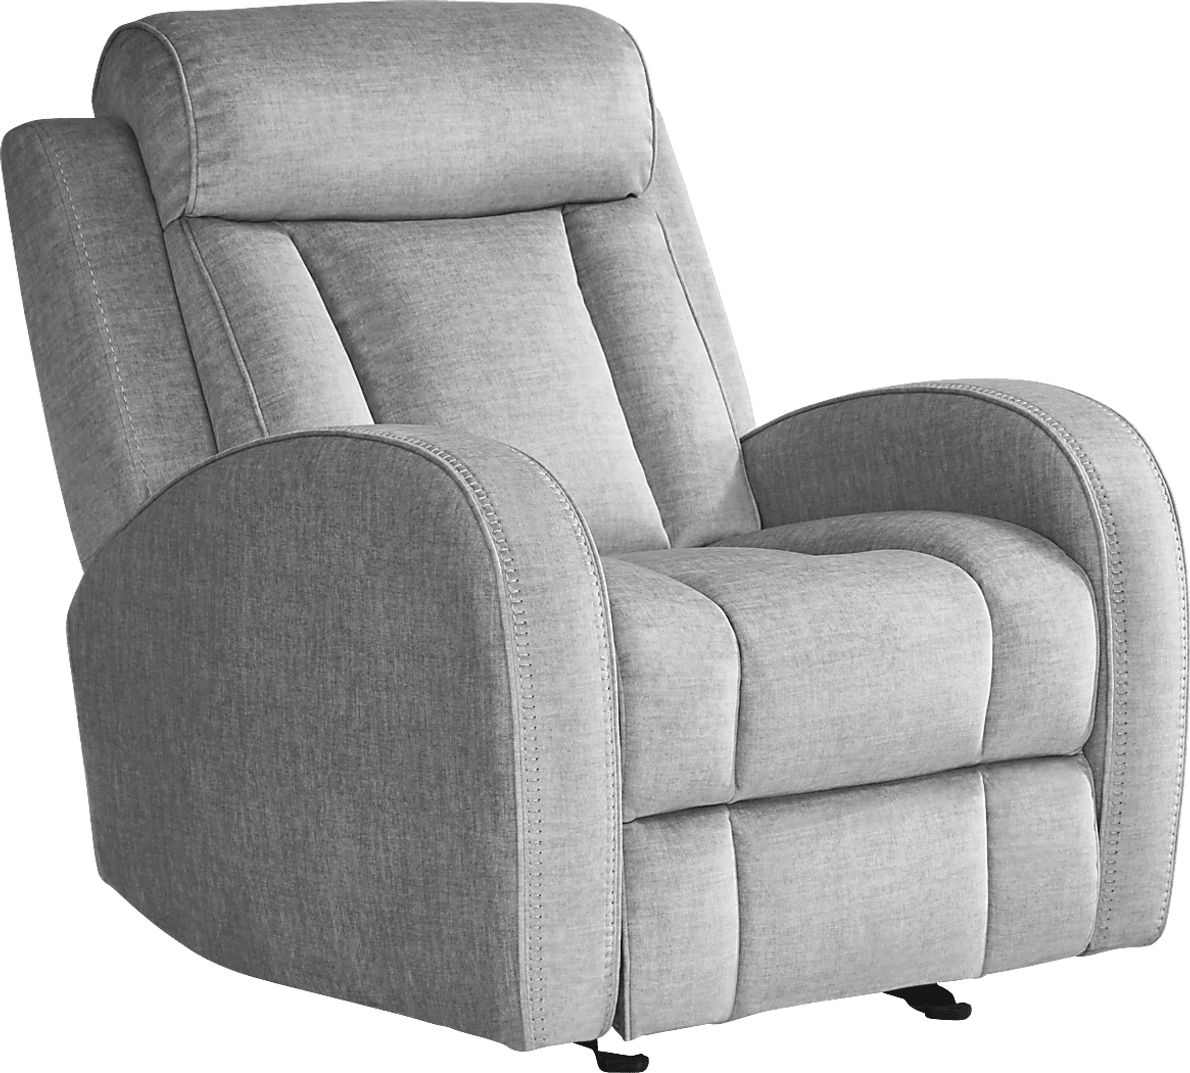 Copperfield Dual Power Recliner